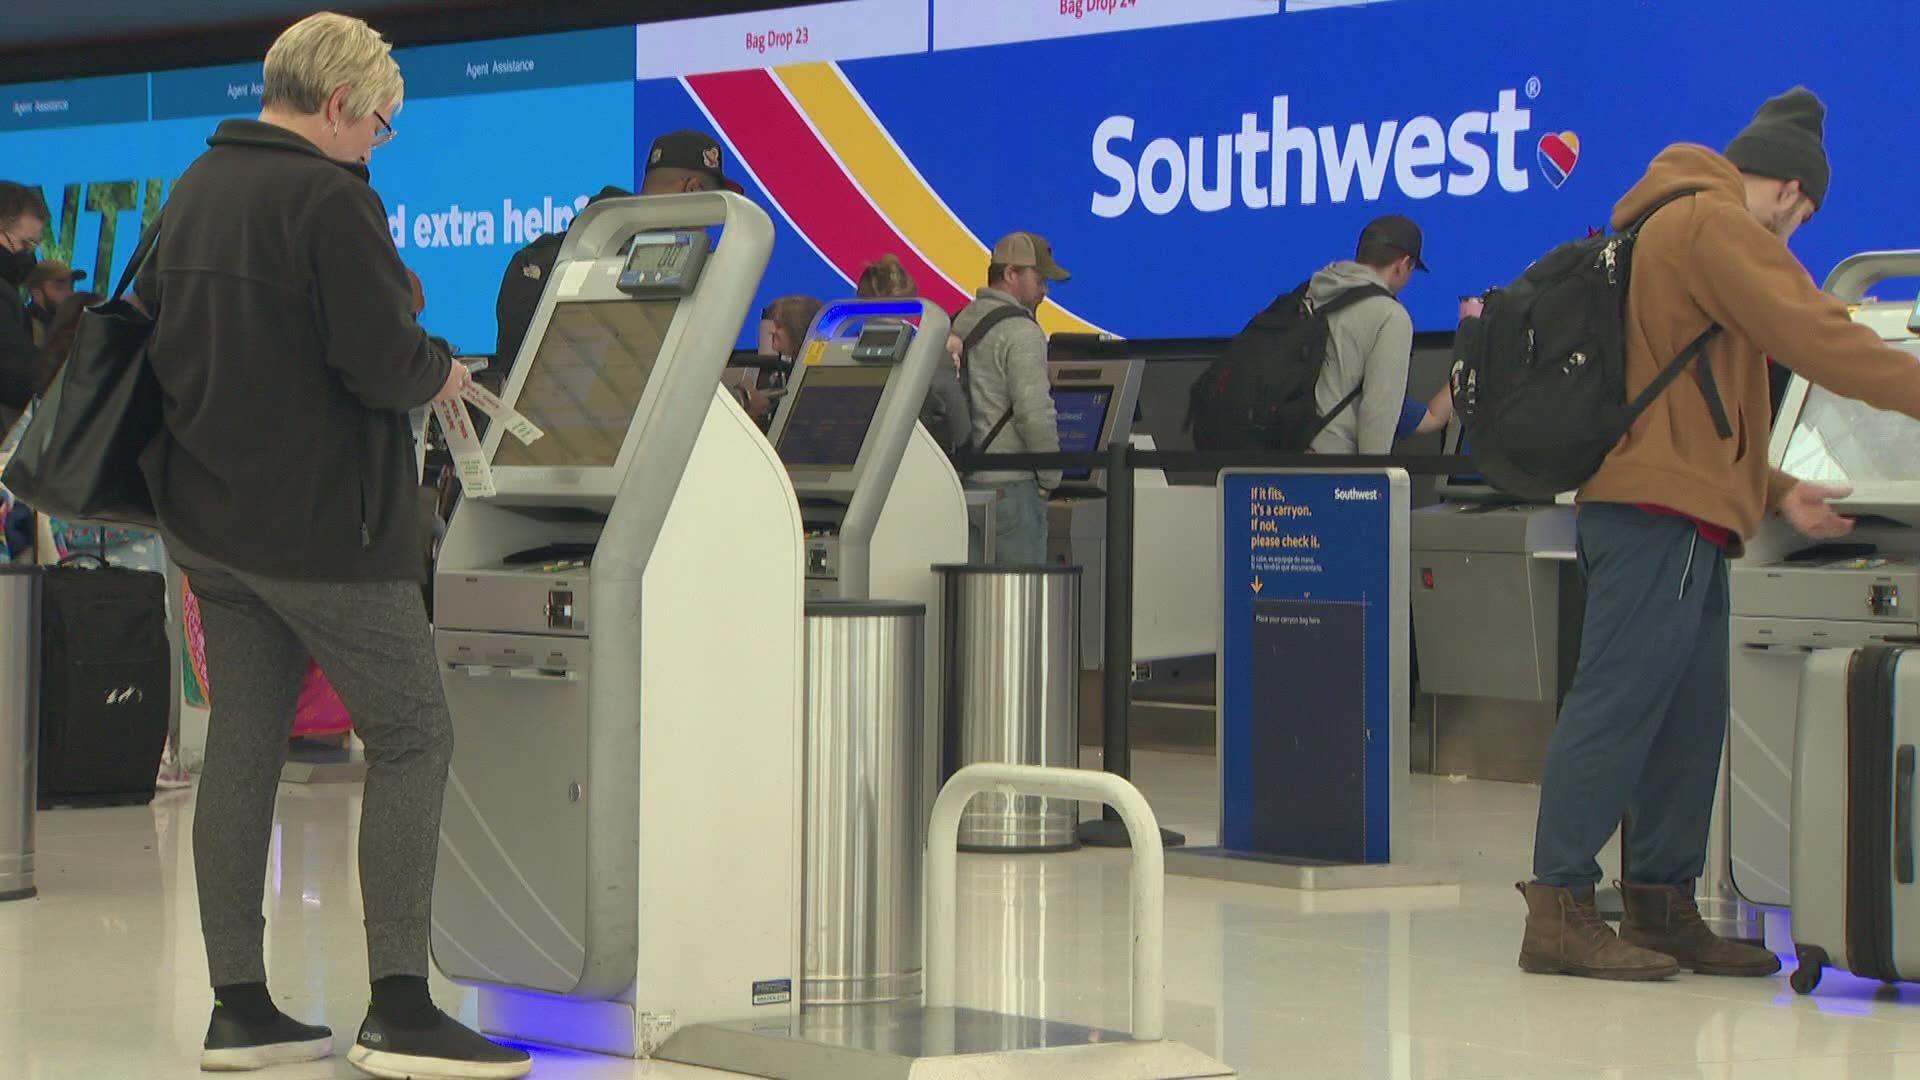 9NEWS Legal Analyst Whitney Traylor discusses customers dissatisfaction with Southwest's apology and the class action lawsuit that has already been filed.